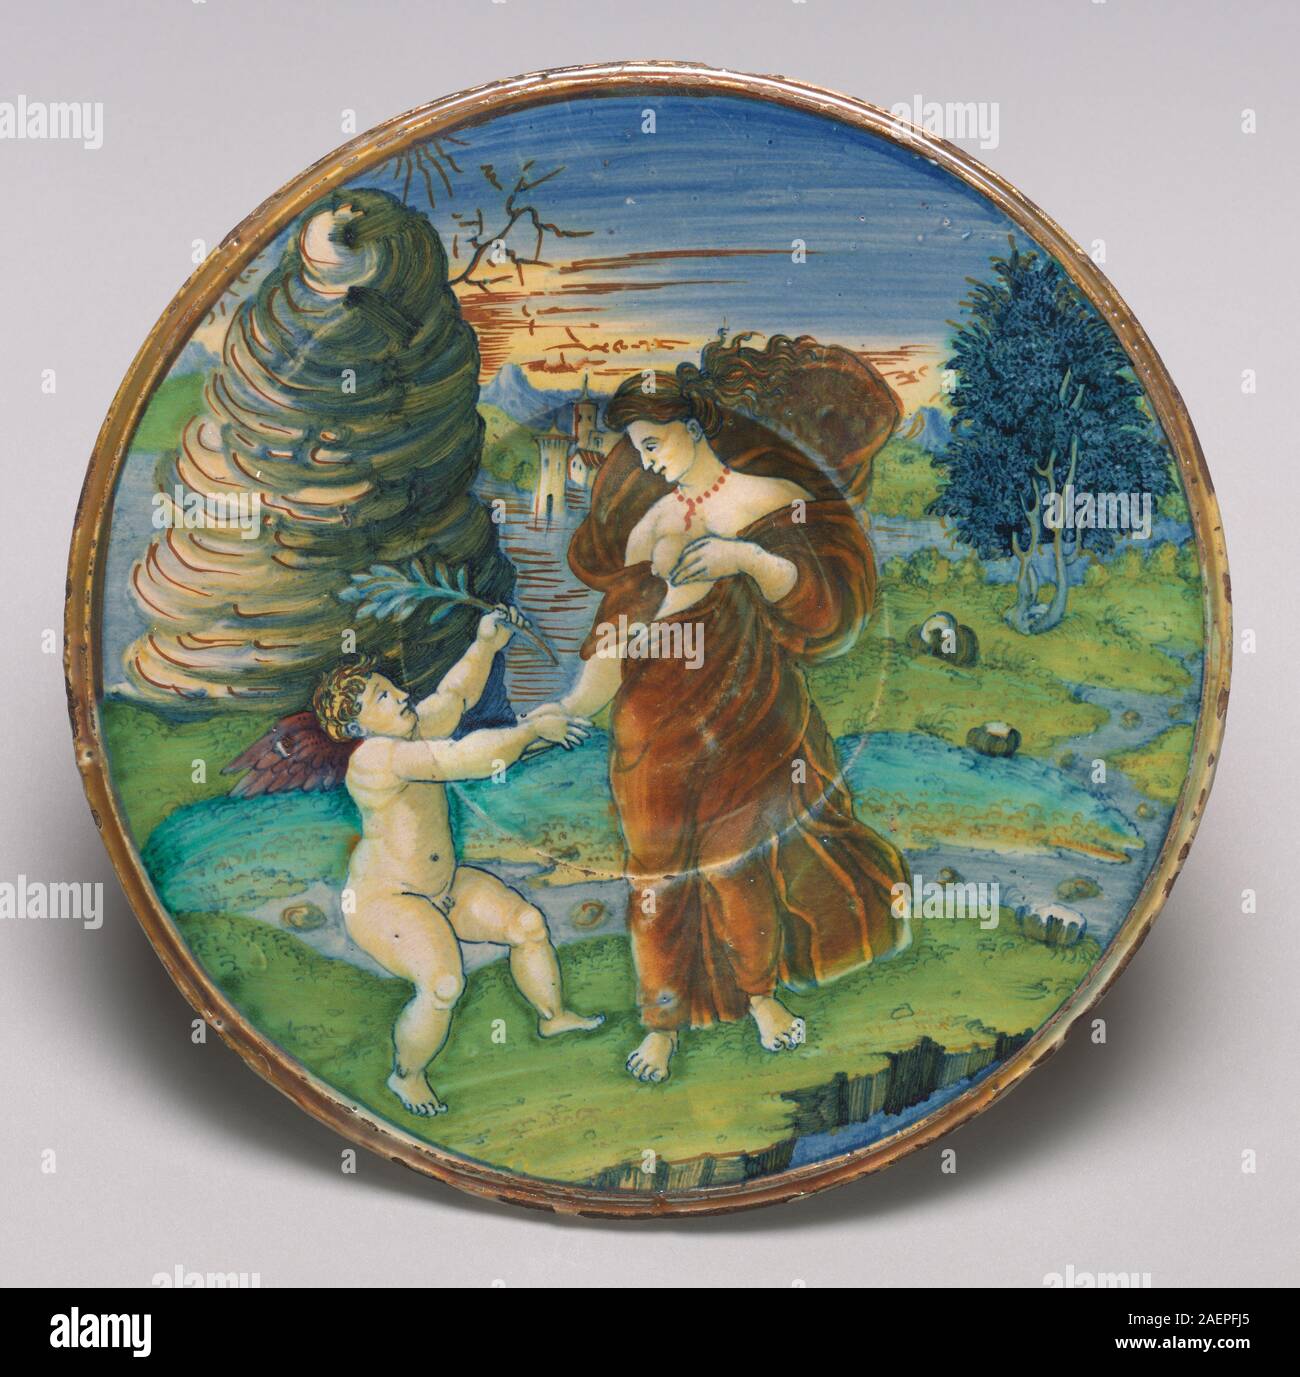 Workshop of Maestro Giorgio Andreoli of Gubbio; painting attributed to the Painter of the Three Graces, Plate with the reconciliation of Cupid and Minerva, 1525, Workshop of Maestro Giorgio Andreoli of Gubbio; painting attributed to the Painter of the Three Graces, Plate with the reconciliation of Cupid and Minerva, 1525, tin-glazed earthenware (maiolica), Widener Collection 1942.9.333 Stock Photo